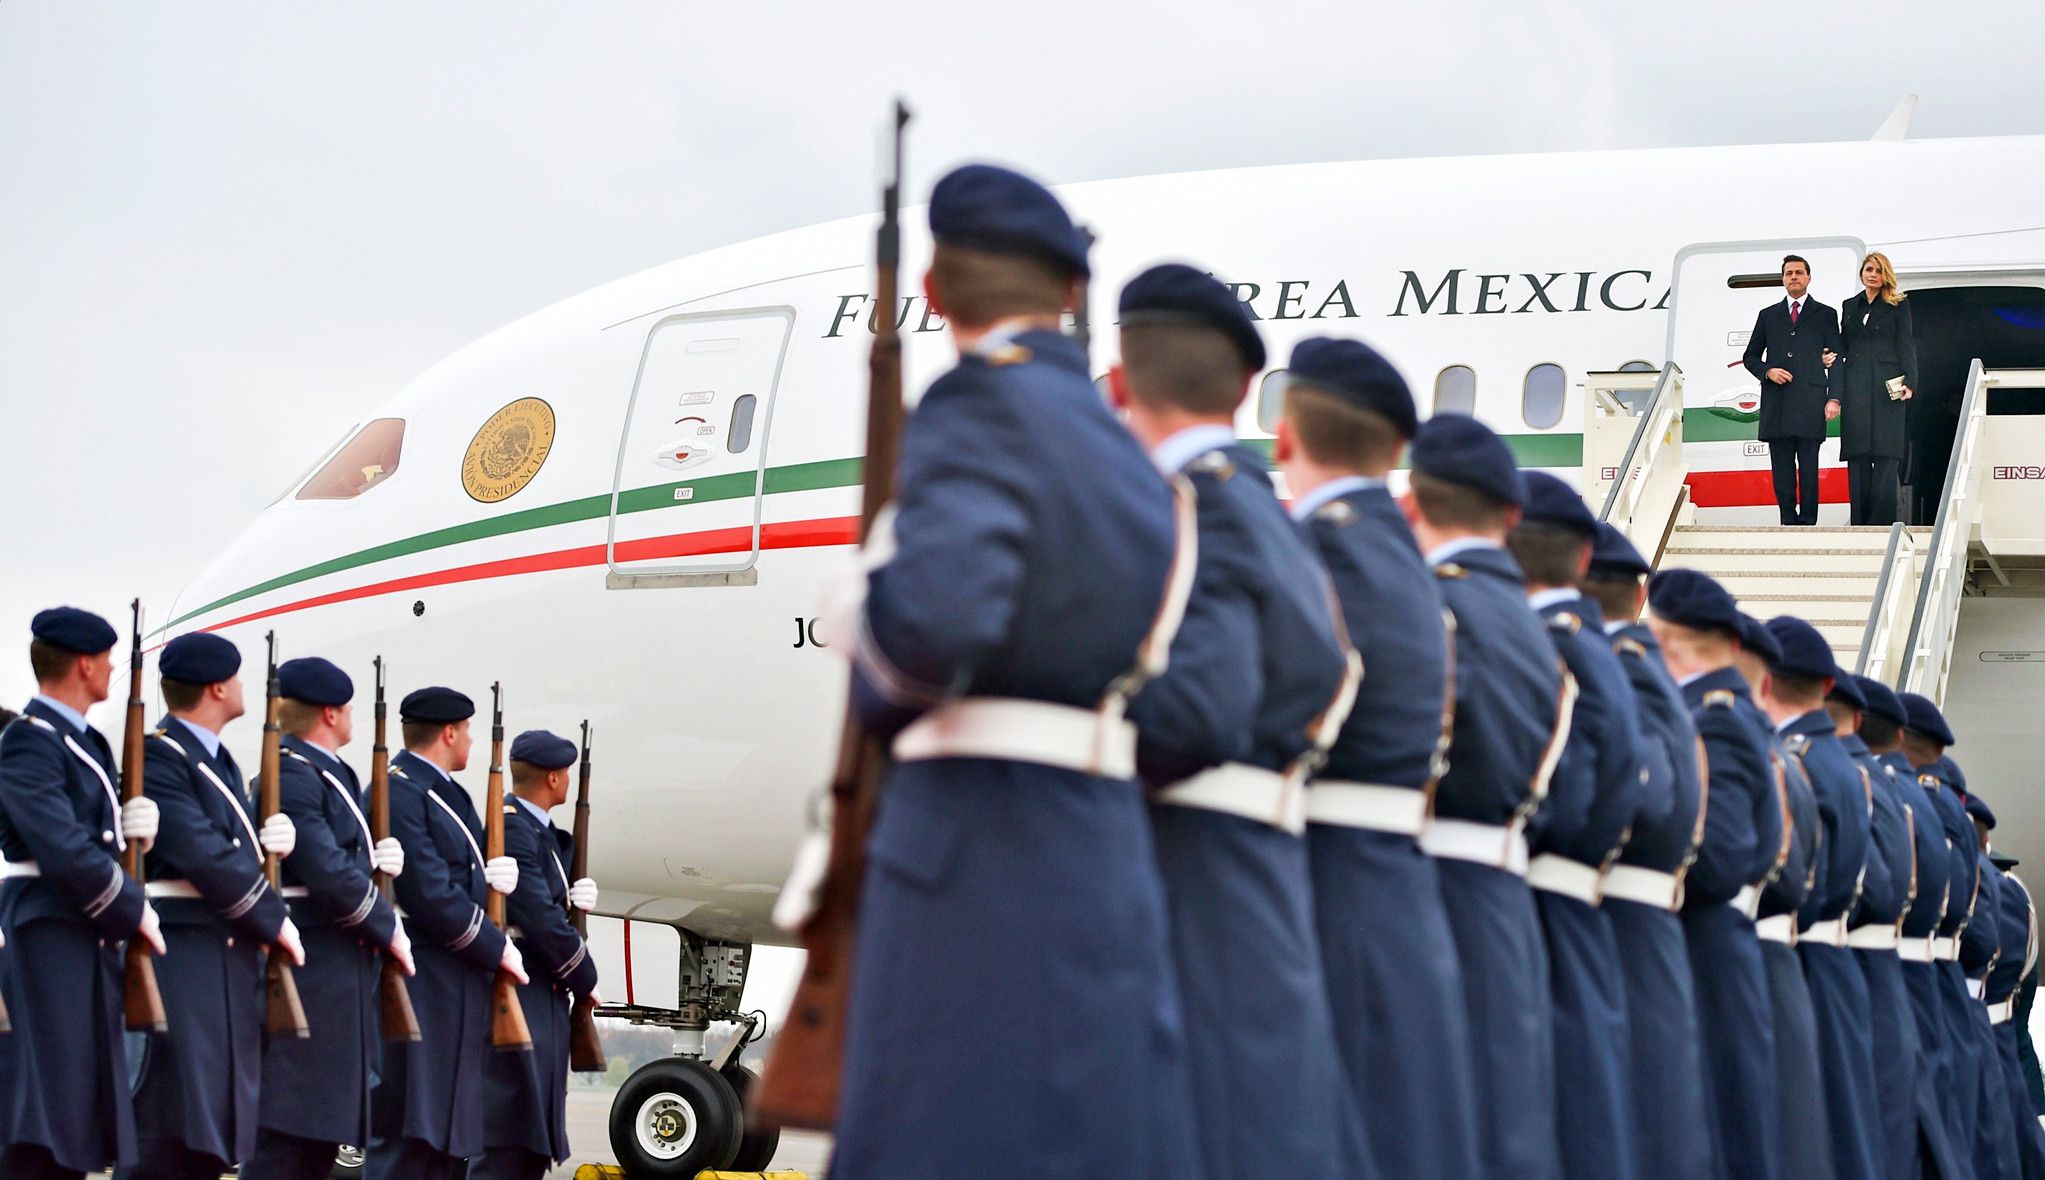 The former Mexican presidential Boeing 787 jet